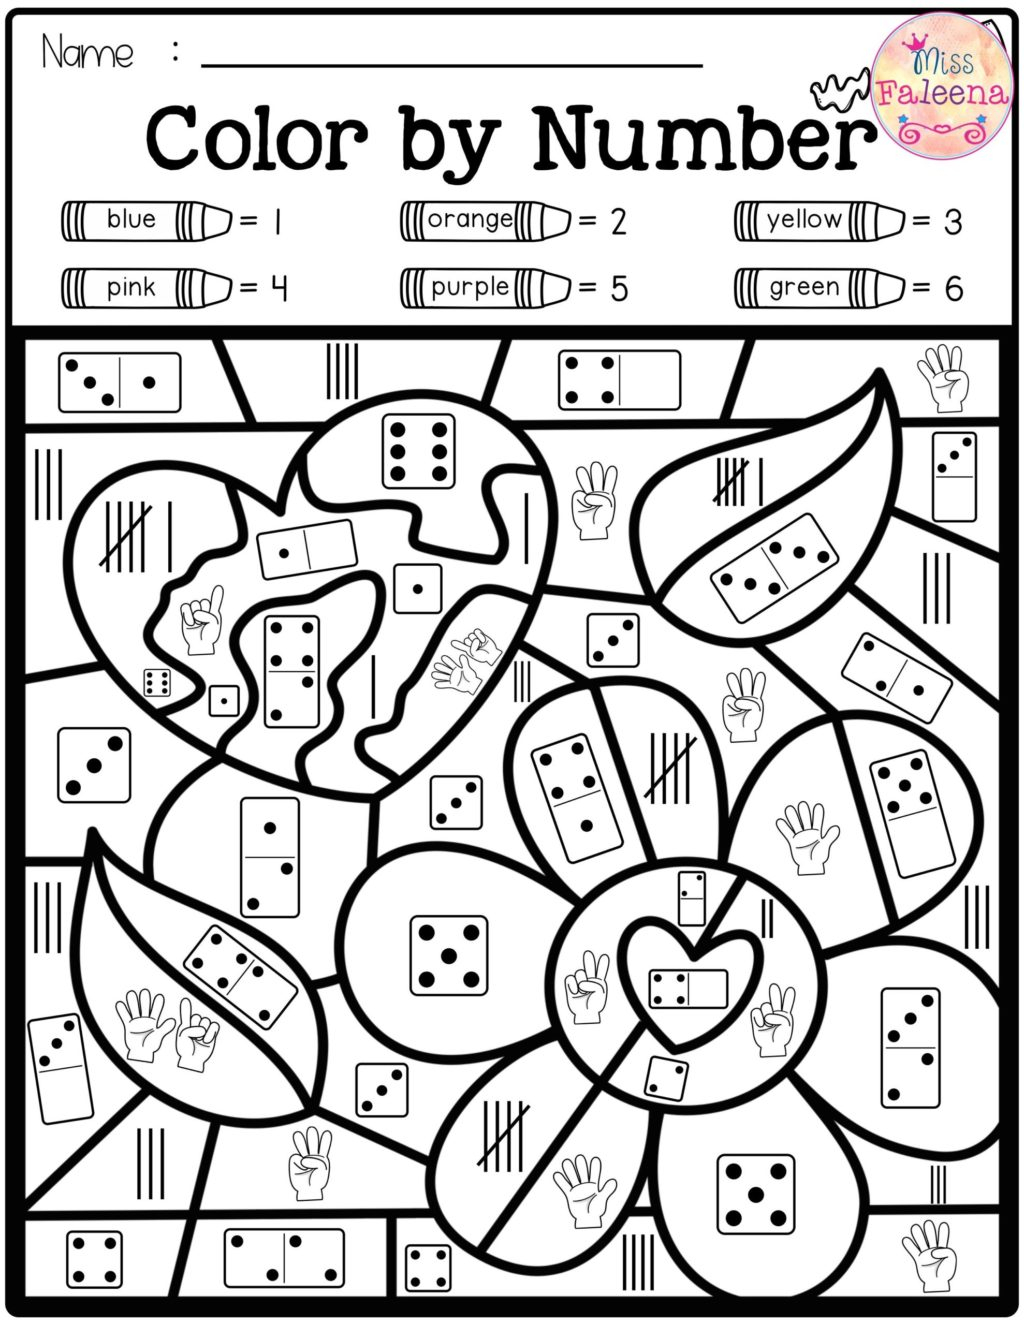 Worksheet ~ Freetraction Colornumber Coloring Pages